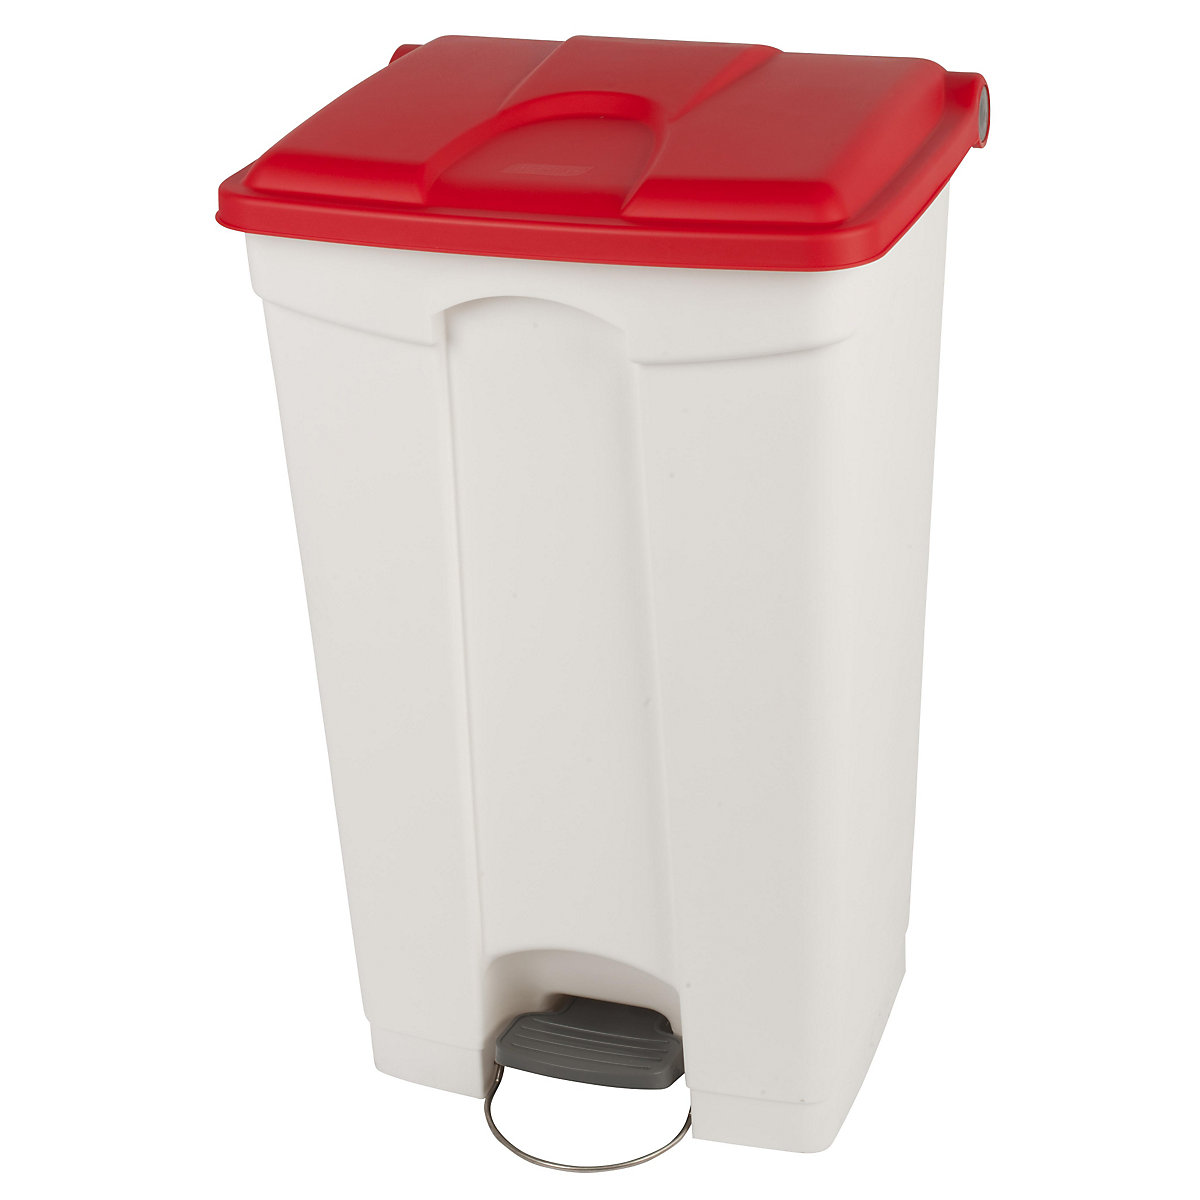 EUROKRAFTbasic – Pedal waste collector, capacity 90 l, WxHxD 505 x 790 x 410 mm, white, red lid